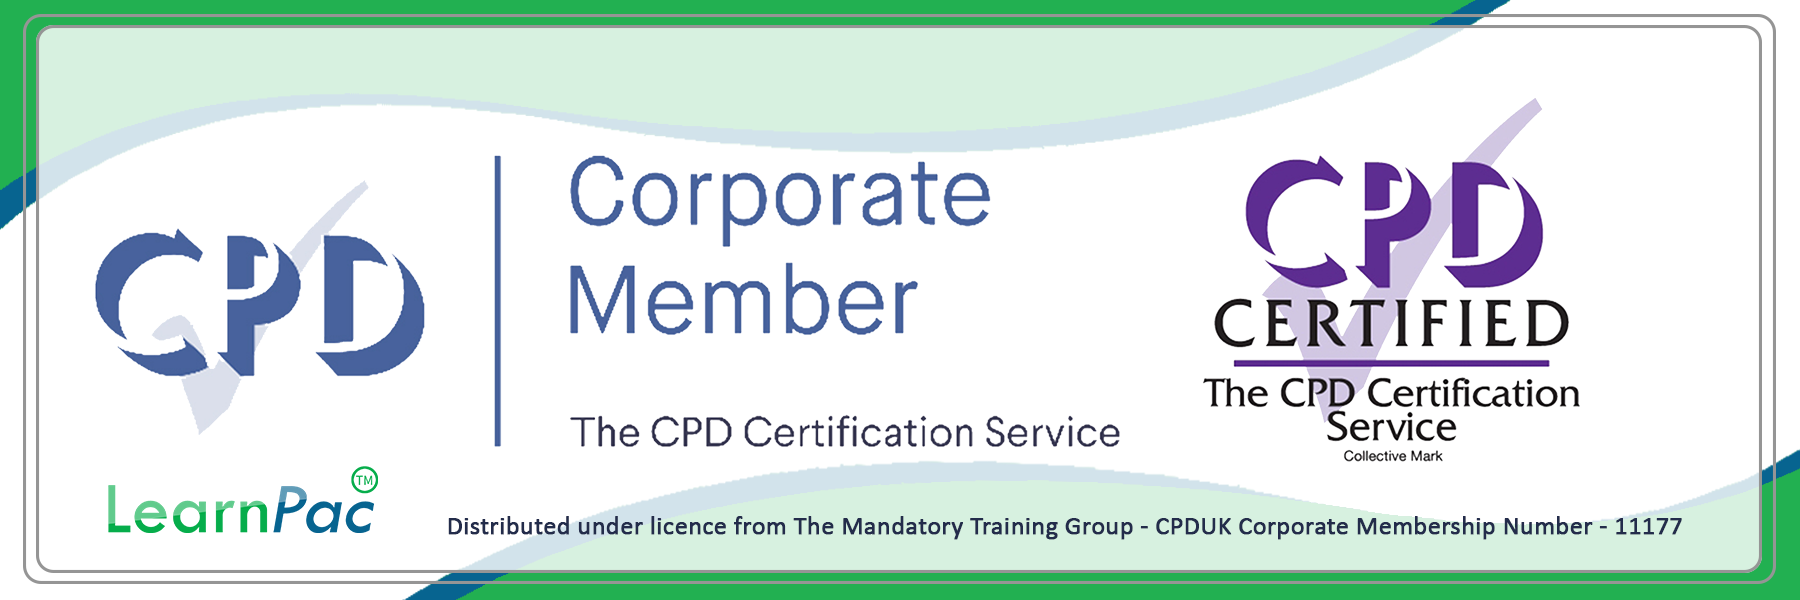 First Aid at Work Training - E-Learning Courses with Certificates - CPD Certified - LearnPac Systems UK -